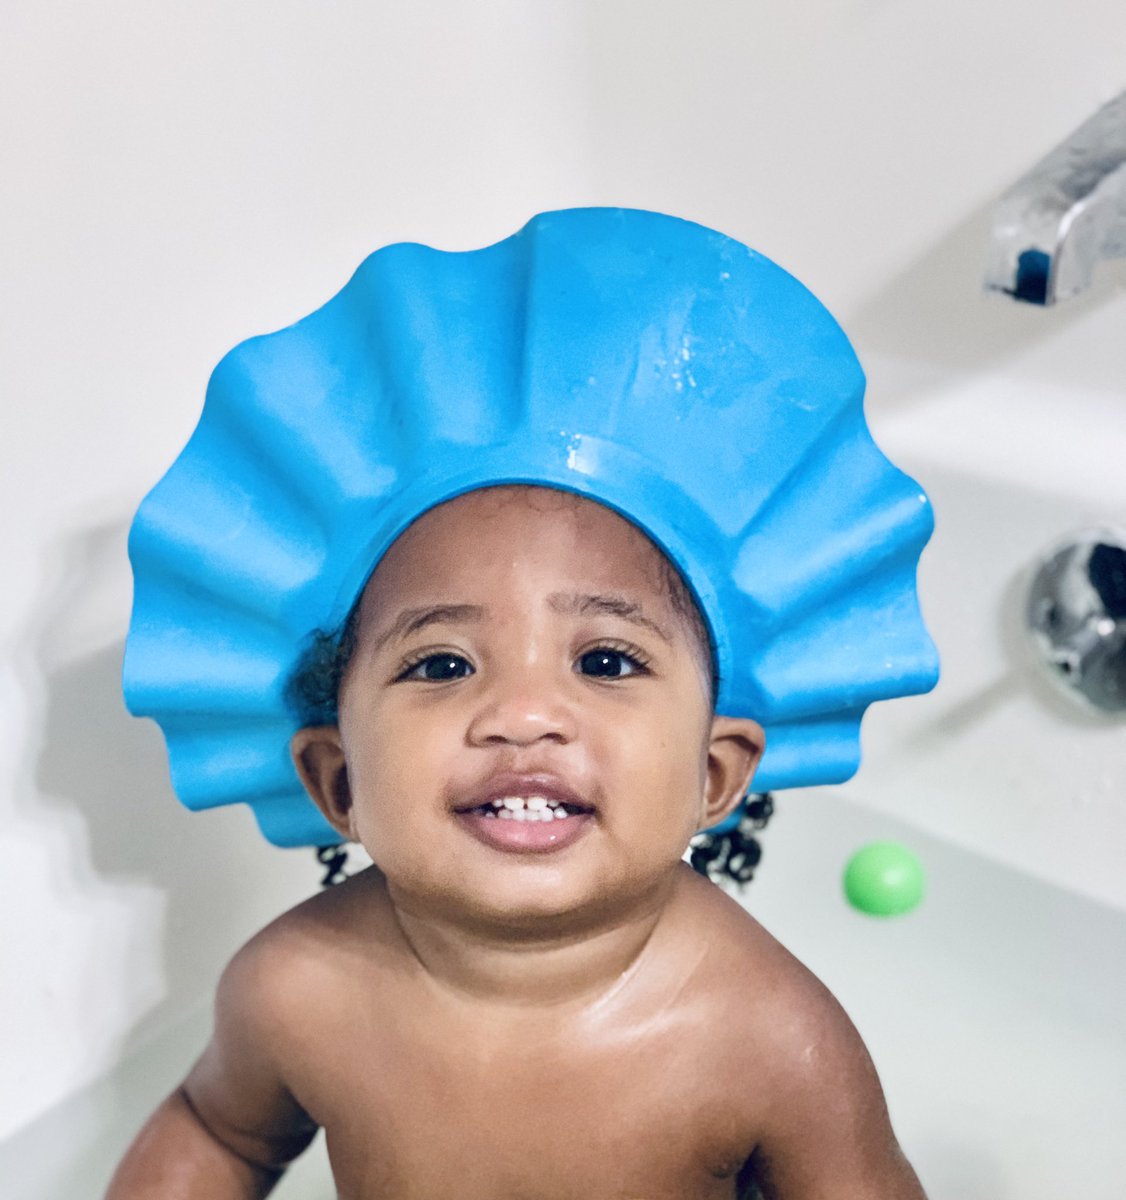 Hi, I’m Tash. I blog about Black motherhood (Breastfeeding, babywearing, baby-led weaning, cloth diapers), weight loss, self care, PPD, Montessori, Positive Parenting, Autism acceptance, booty shaking, & our Black millennial family dynamic on my IG  http://instagram.com/Supernova_momma 